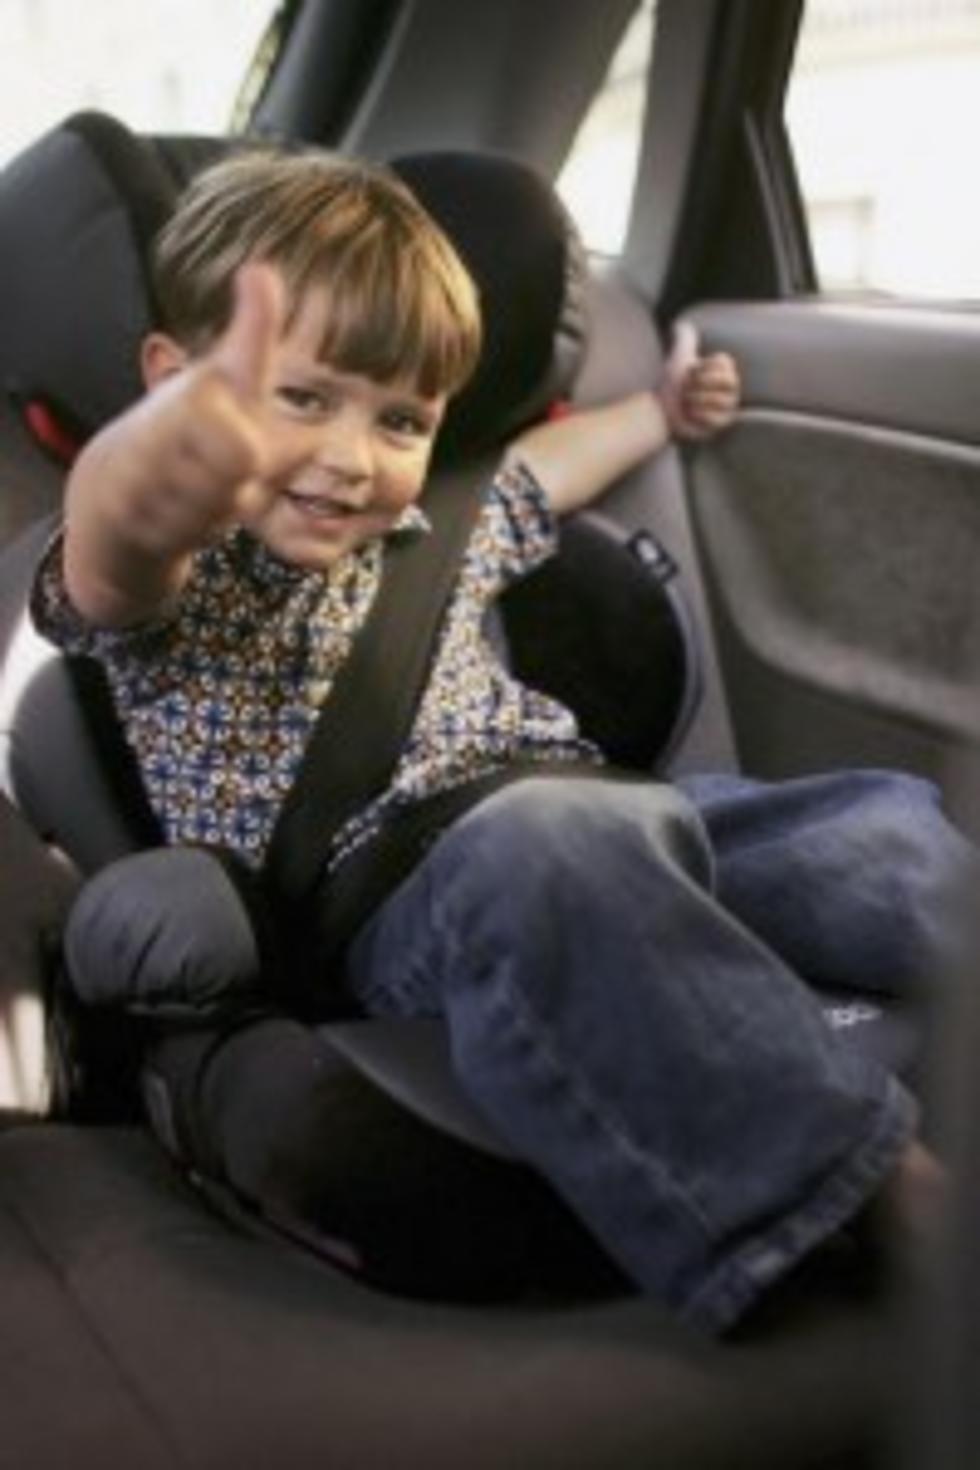 Boys More Likely to Try to Escape Car Seat